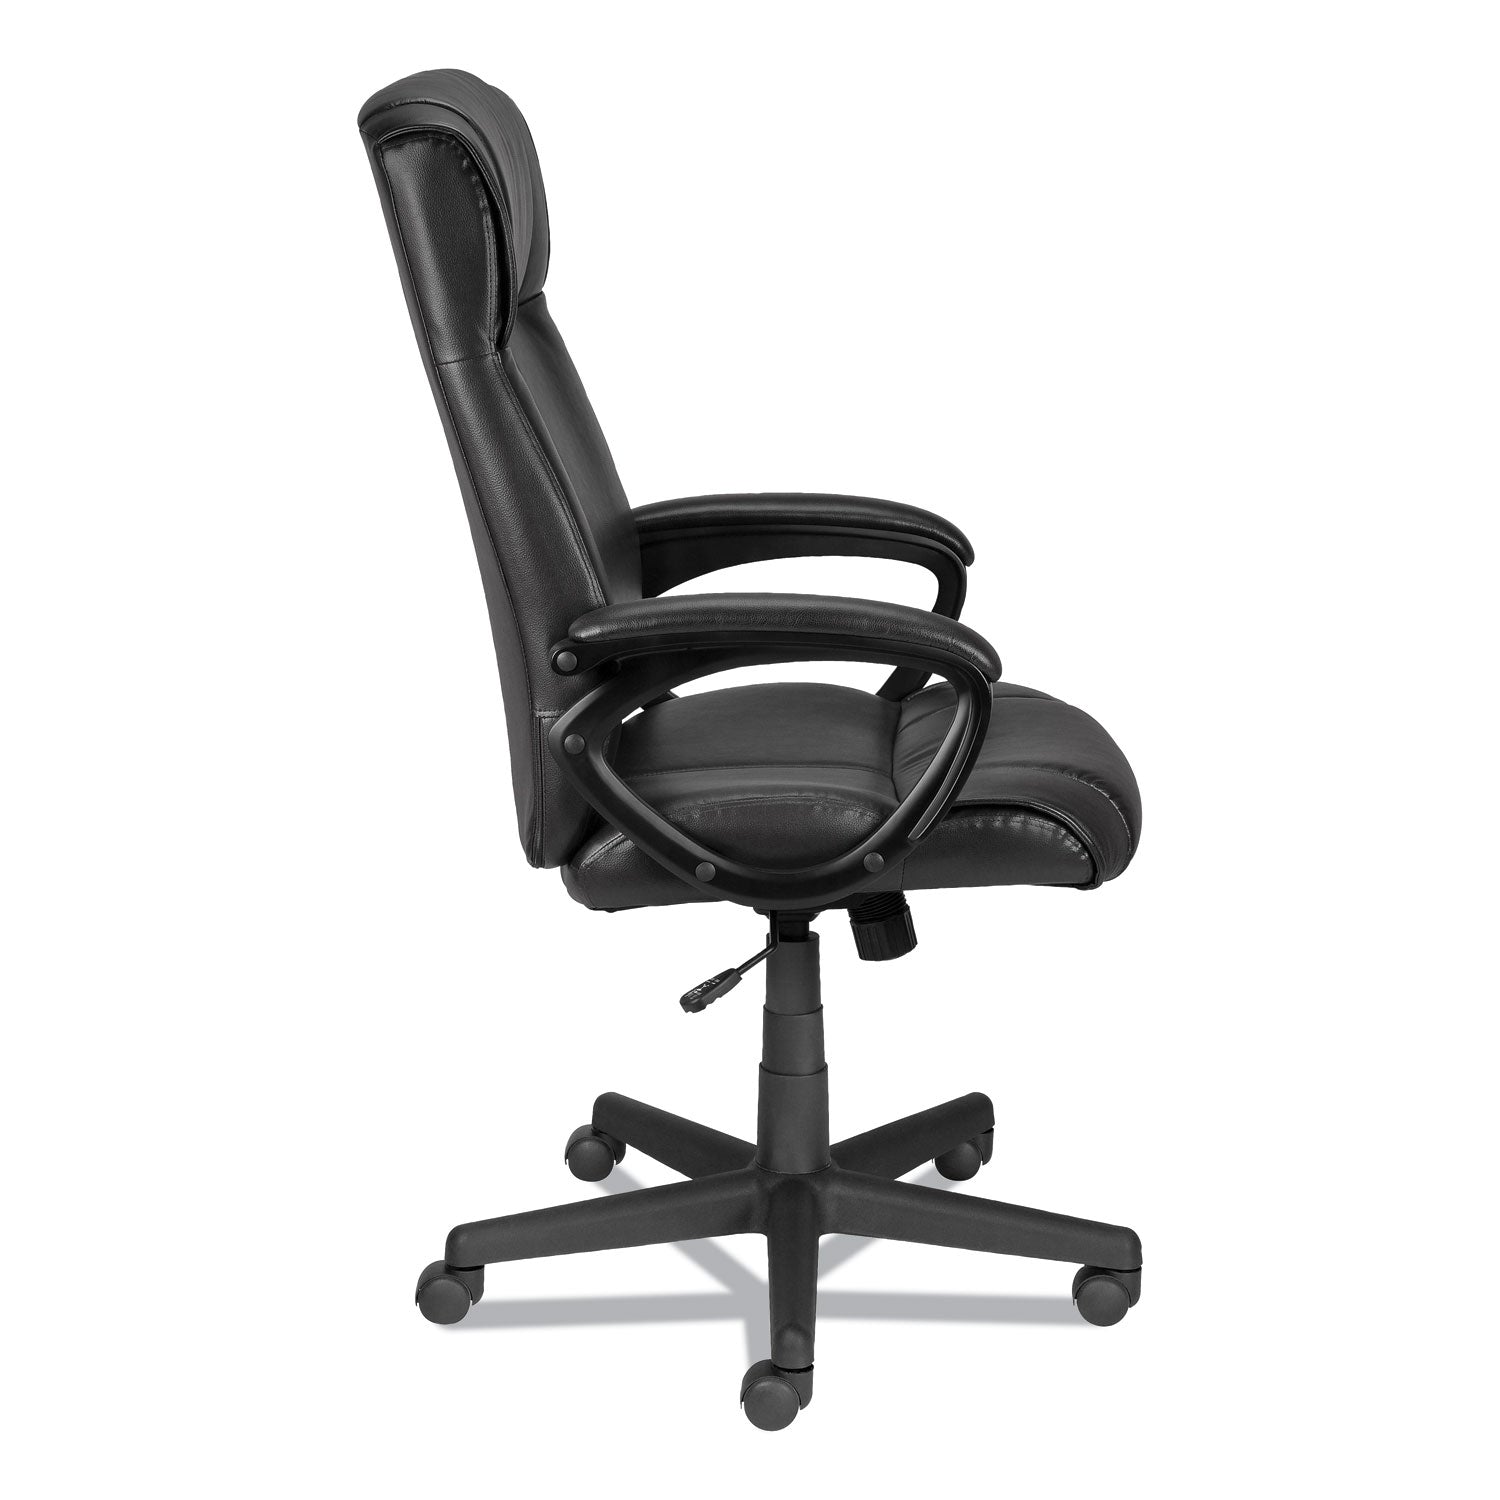 Alera Dalibor Series Manager Chair, Supports Up to 250 lb, 17.5" to 21.3" Seat Height, Black Seat/Back, Black Base - 4